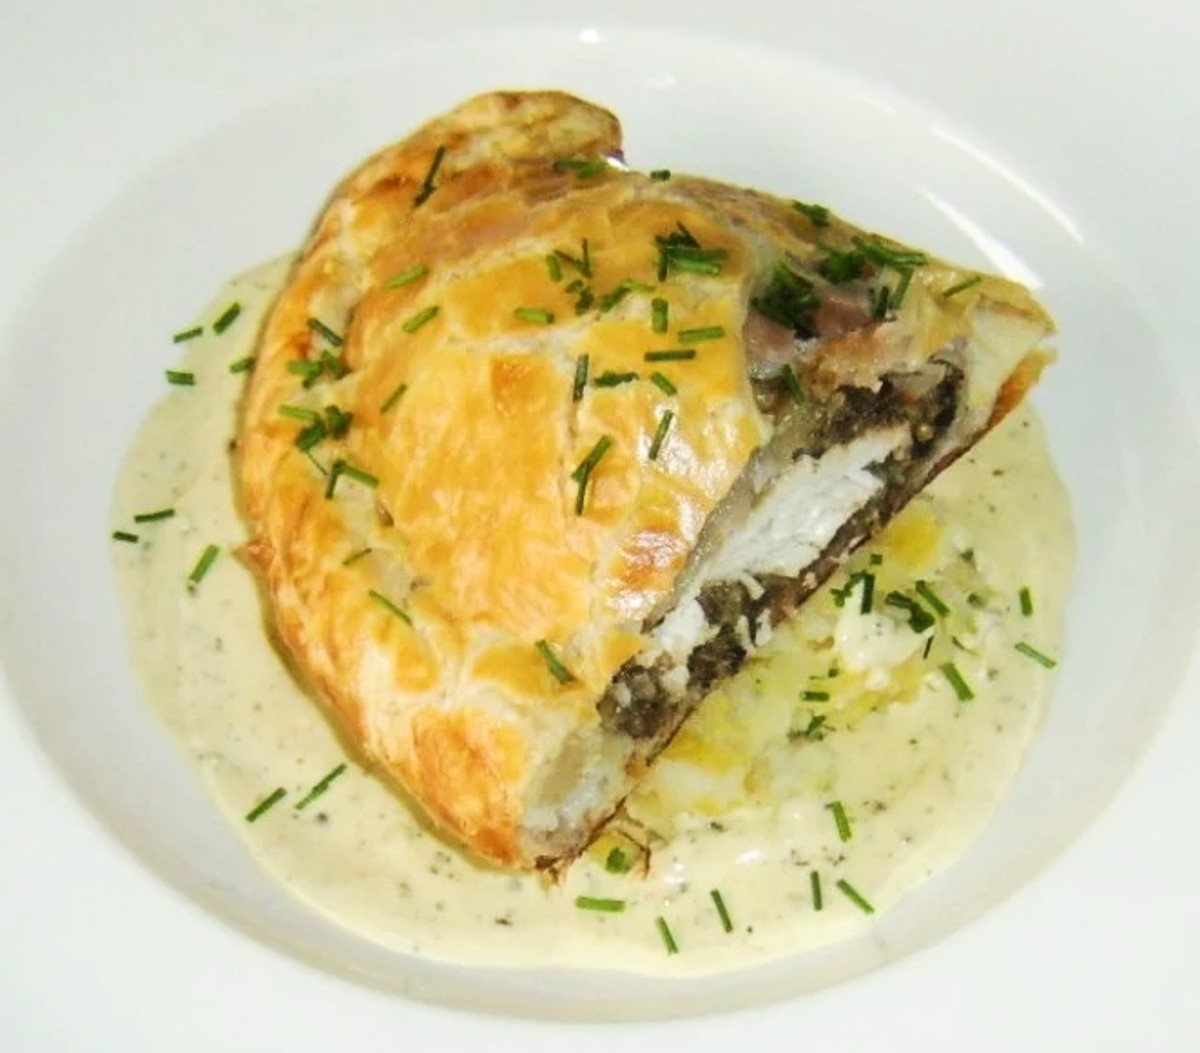 A pasty filled with haggis, chicken and bacon is served on a bed of potato and swede mash with a peppercorn and mustard sauce